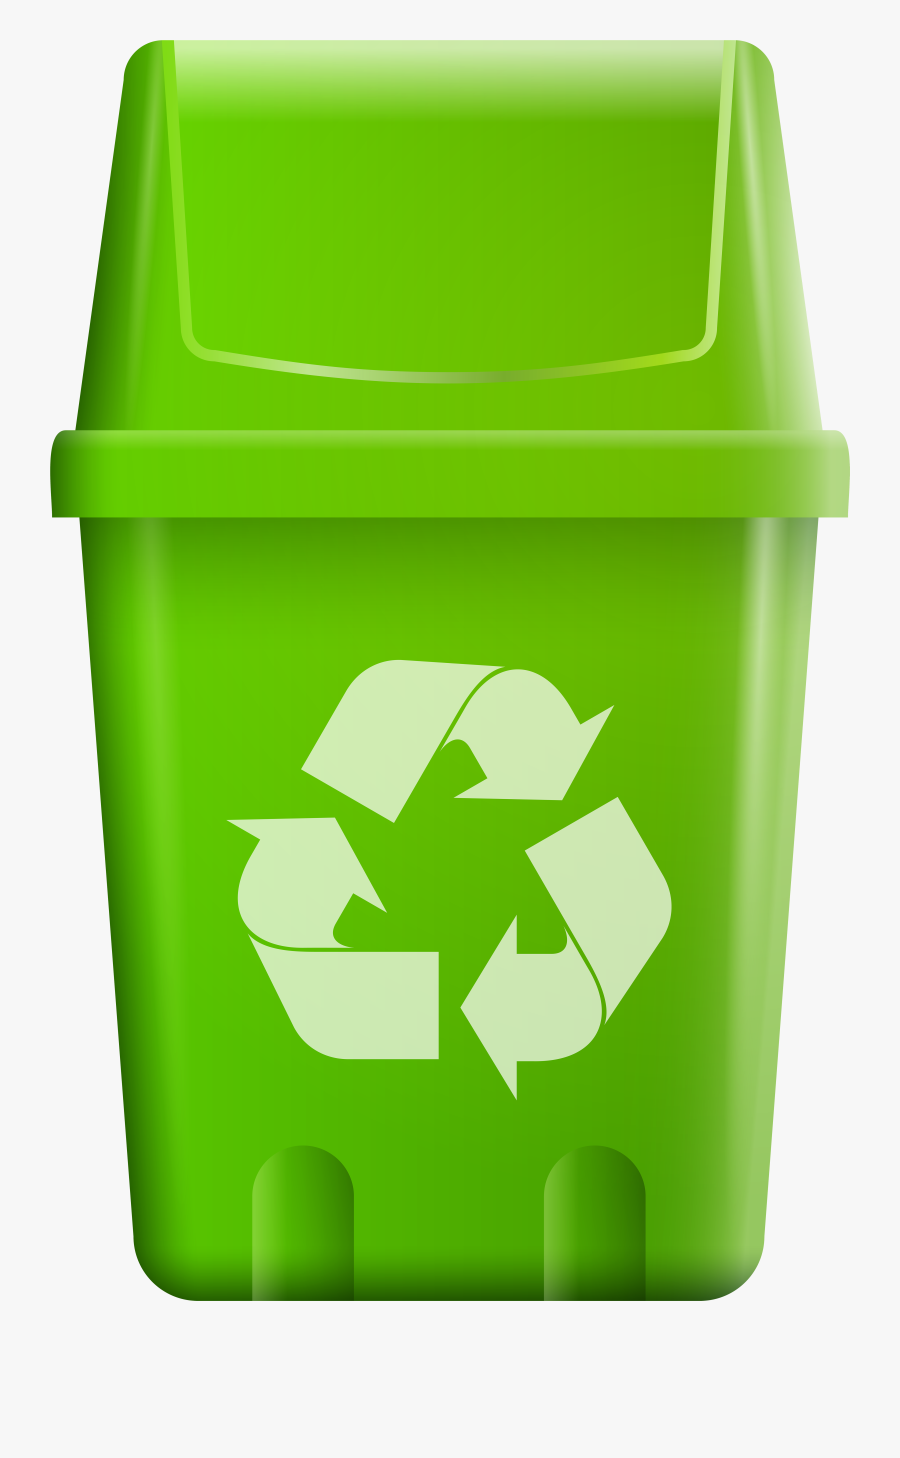 Trash Bin With Recycle Symbol Png Clip Art - White Recycle Icon, Transparent Clipart